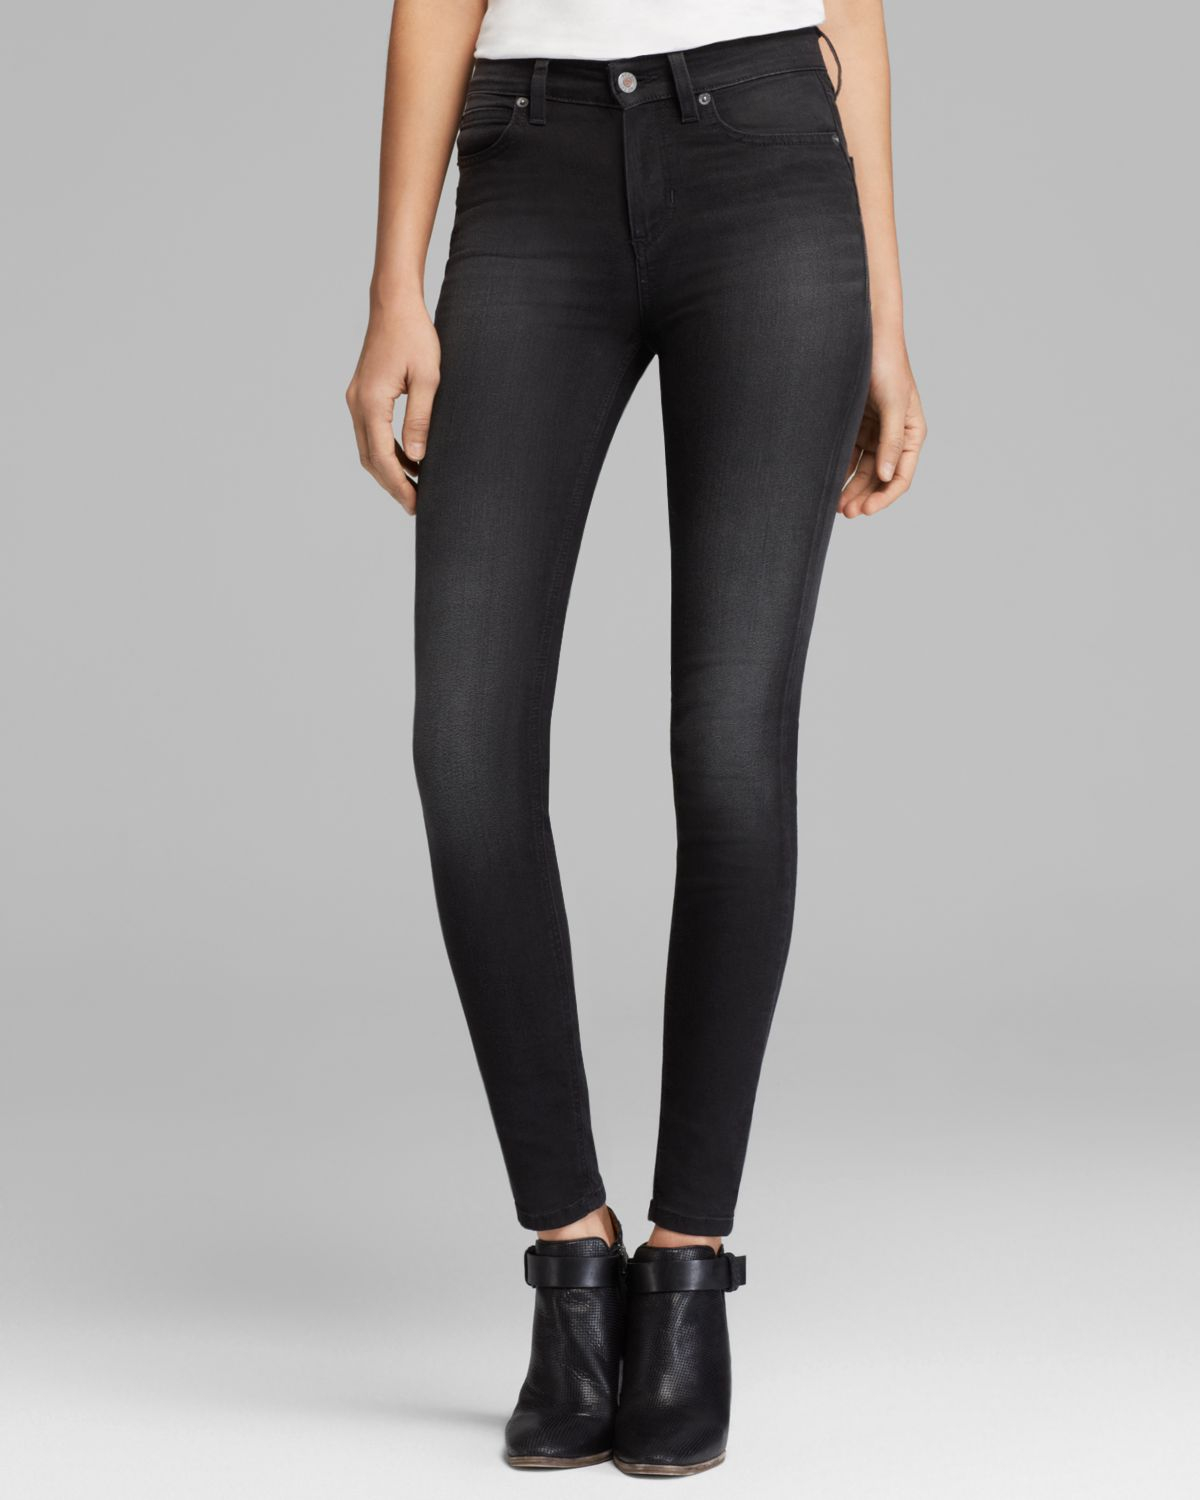 guess black jeans 1981 high waist skinny in faded noir product 1 17558023 0 266793780 normal